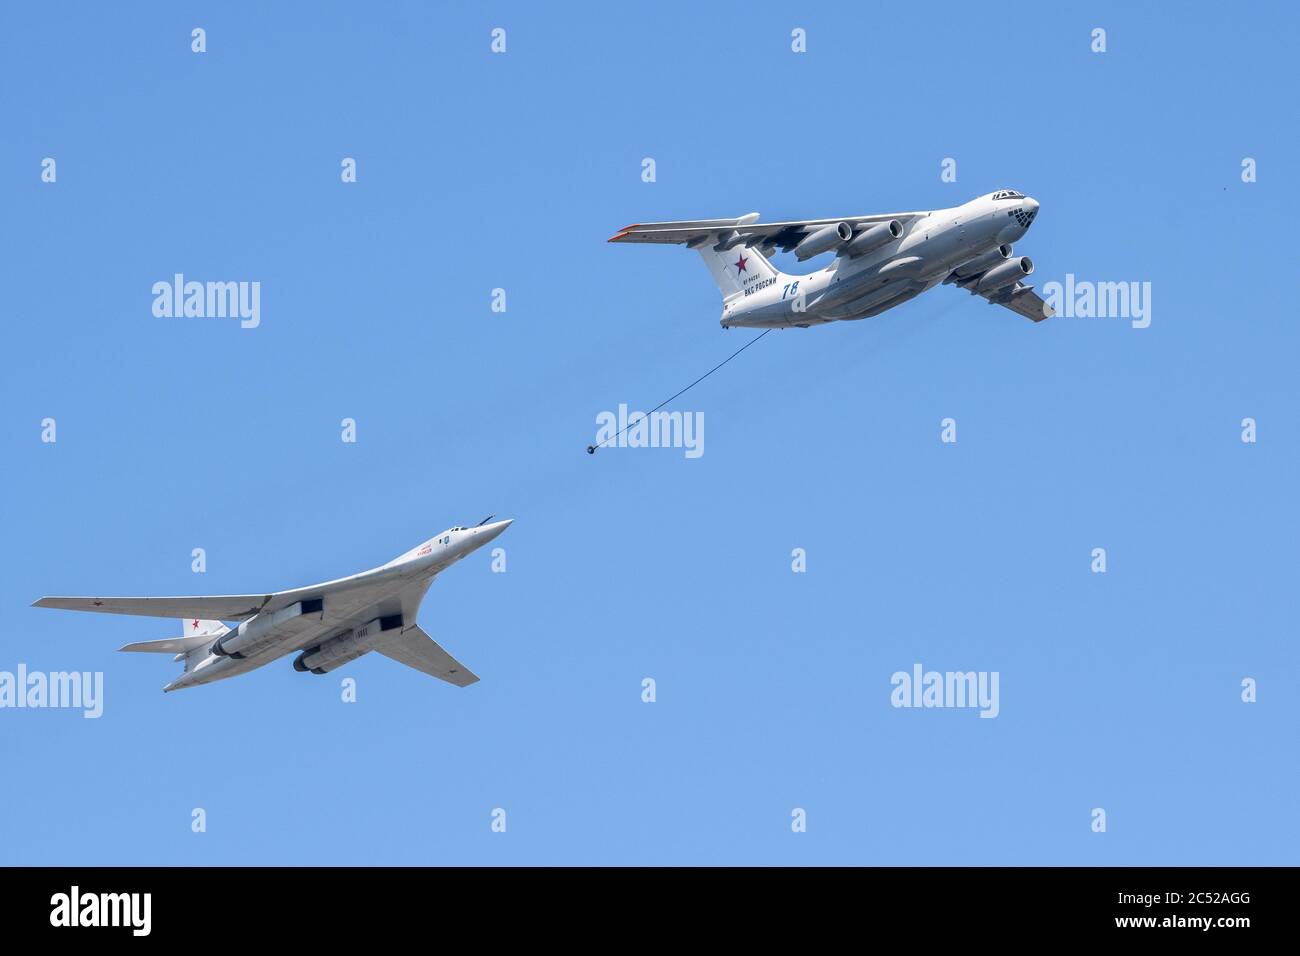 MOSCOW, RUSSIA - JUN 2020: Refueling aircraft and supersonic strategic bomber Tu-160 (Blackjack) at the parade in honor of the 75th anniversary of the Stock Photo